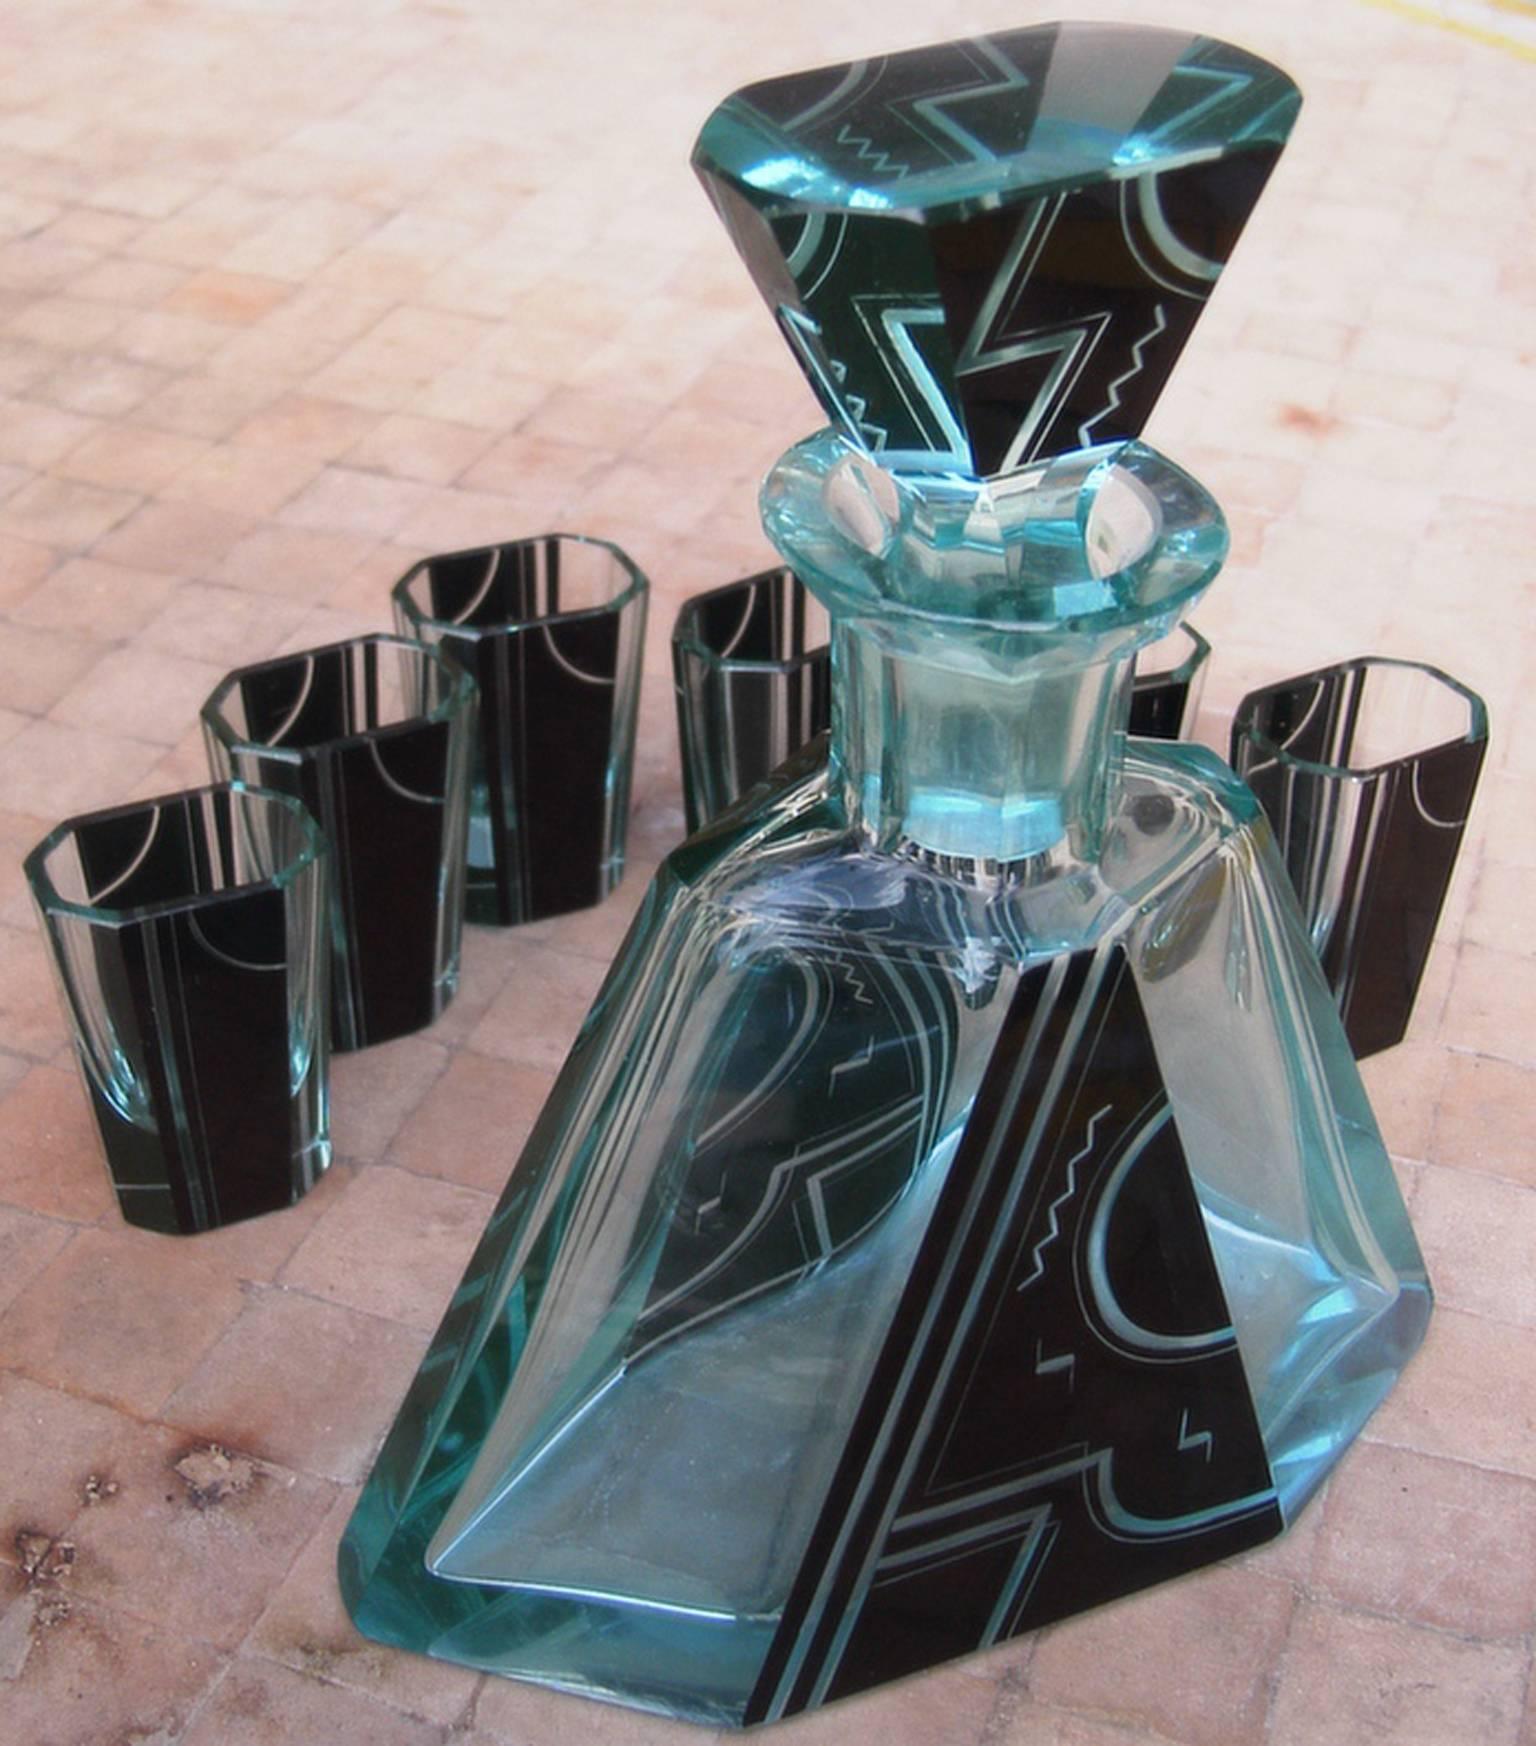 French Art Deco liqueur crystal set, one bottle and six glasses in a great geometric style and decor.
France, circa 1925.